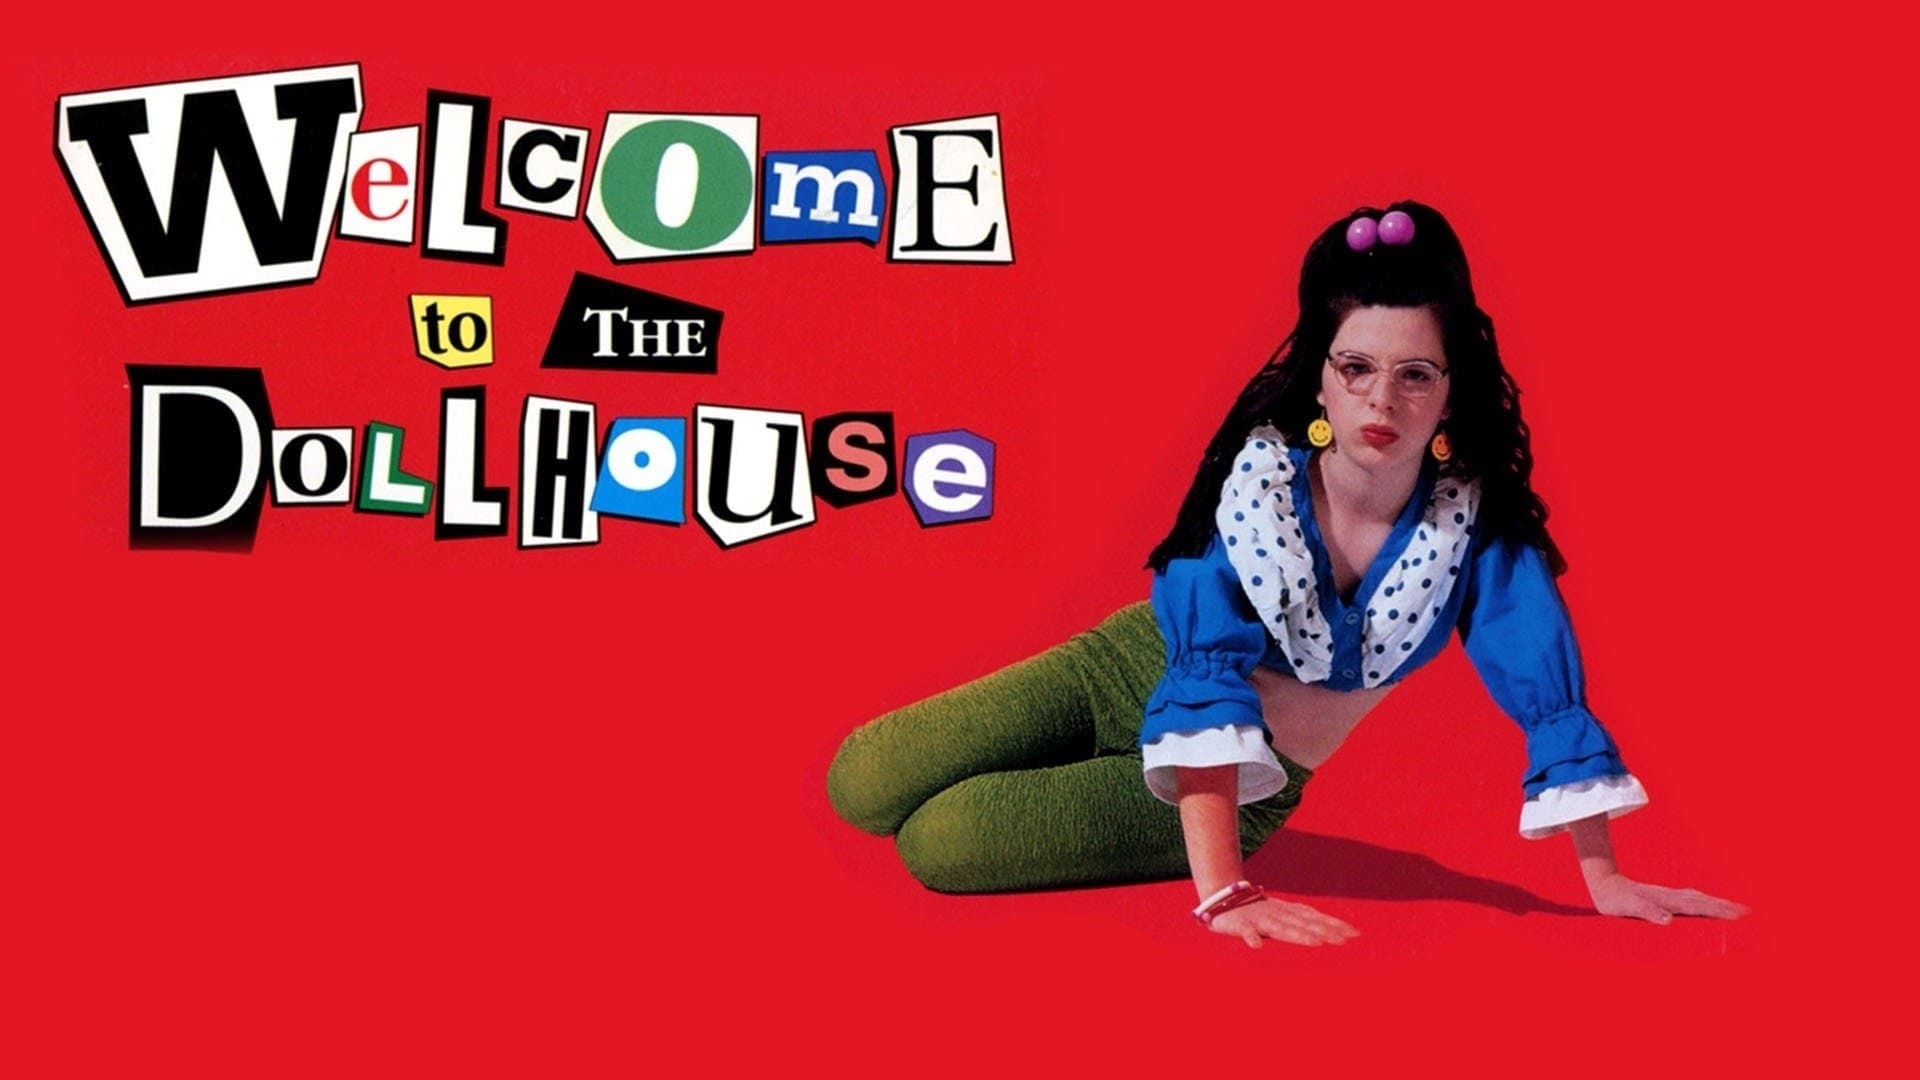 Welcome to the Dollhouse (1996)